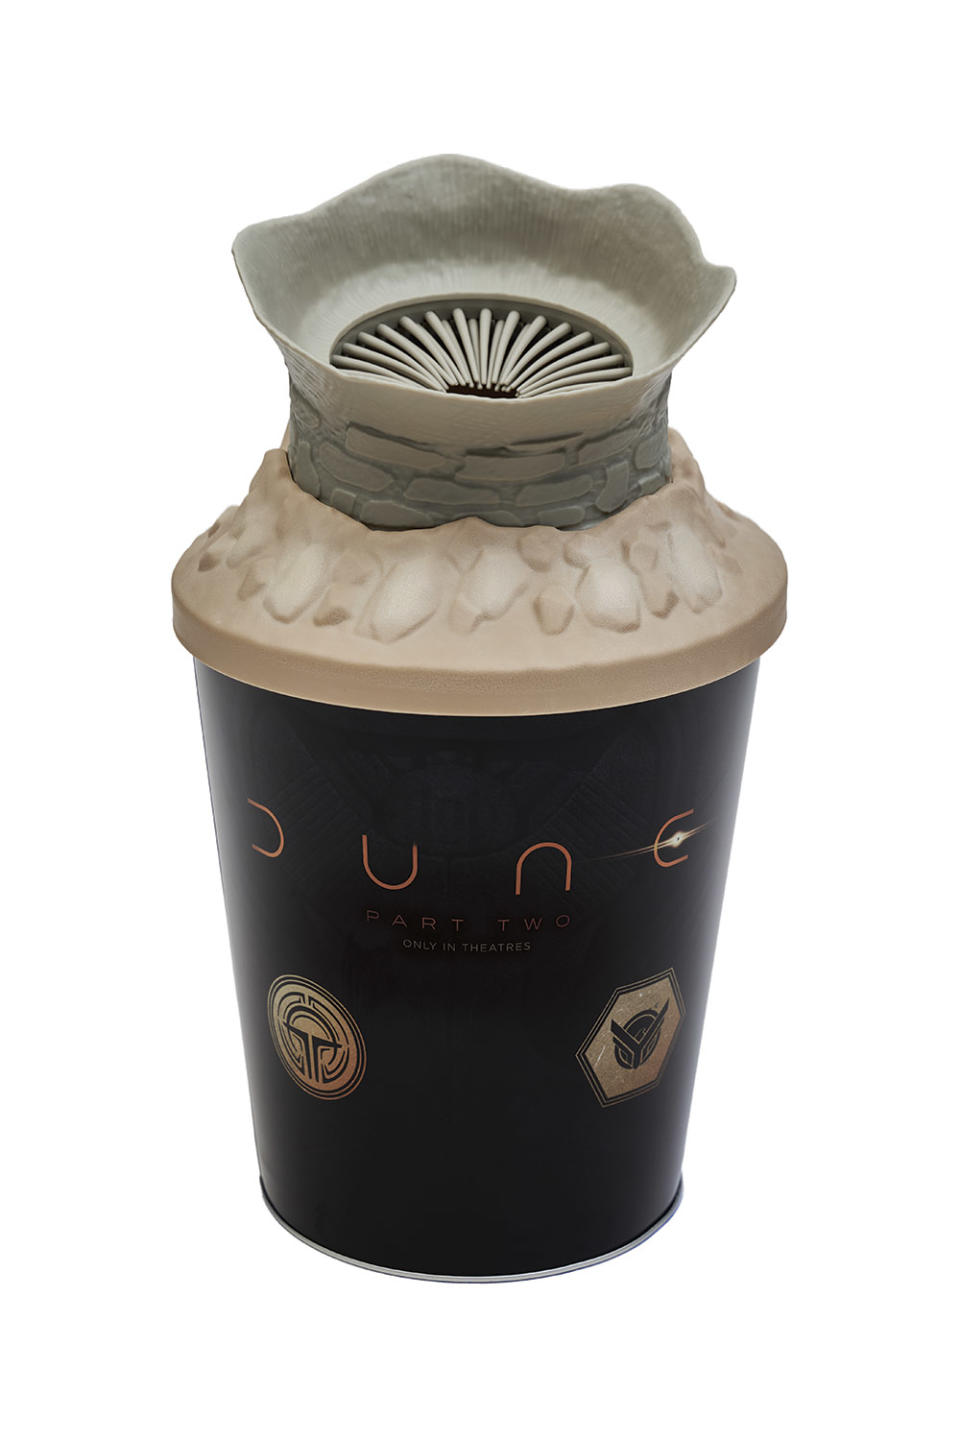 Sandworms apparently have an appetite for popcorn, judging by the vessel ($24.99 from AMC) that caused a spicy social media response and is supporting both the current reissue of Dune (2021) and the sequel’s March 1 release.